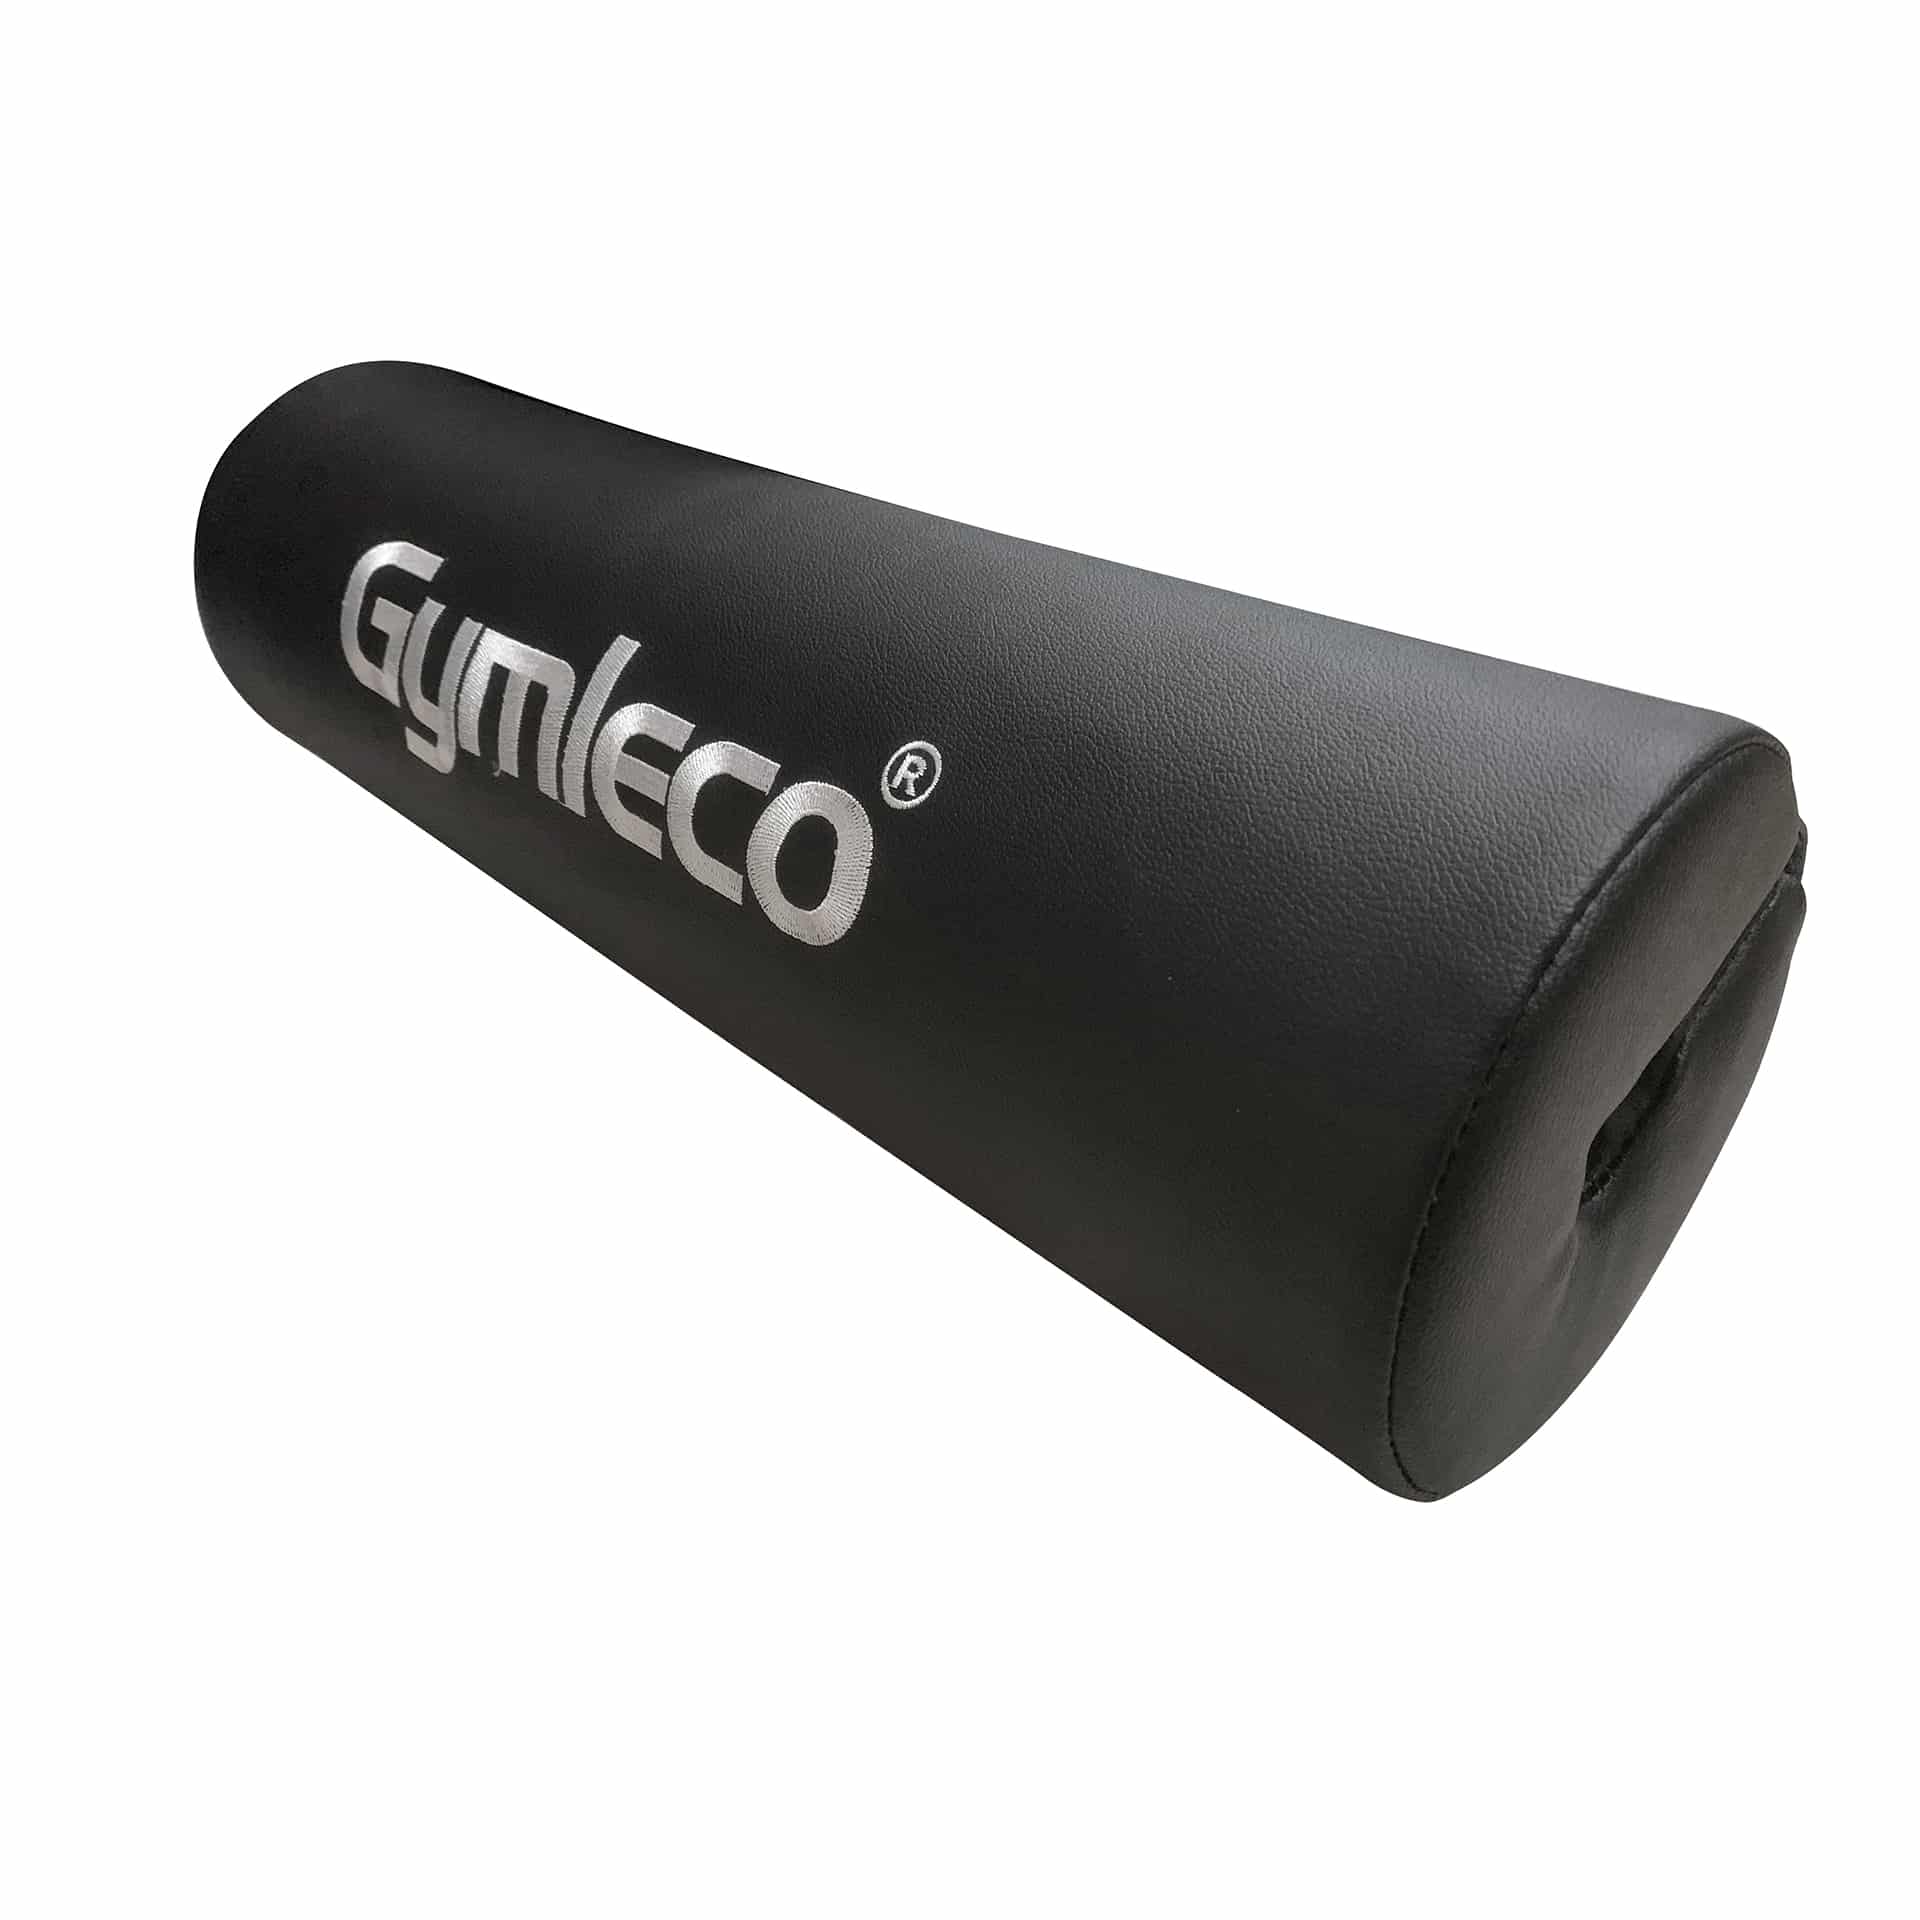 Hip thurst barbell pad in black from Gymleco